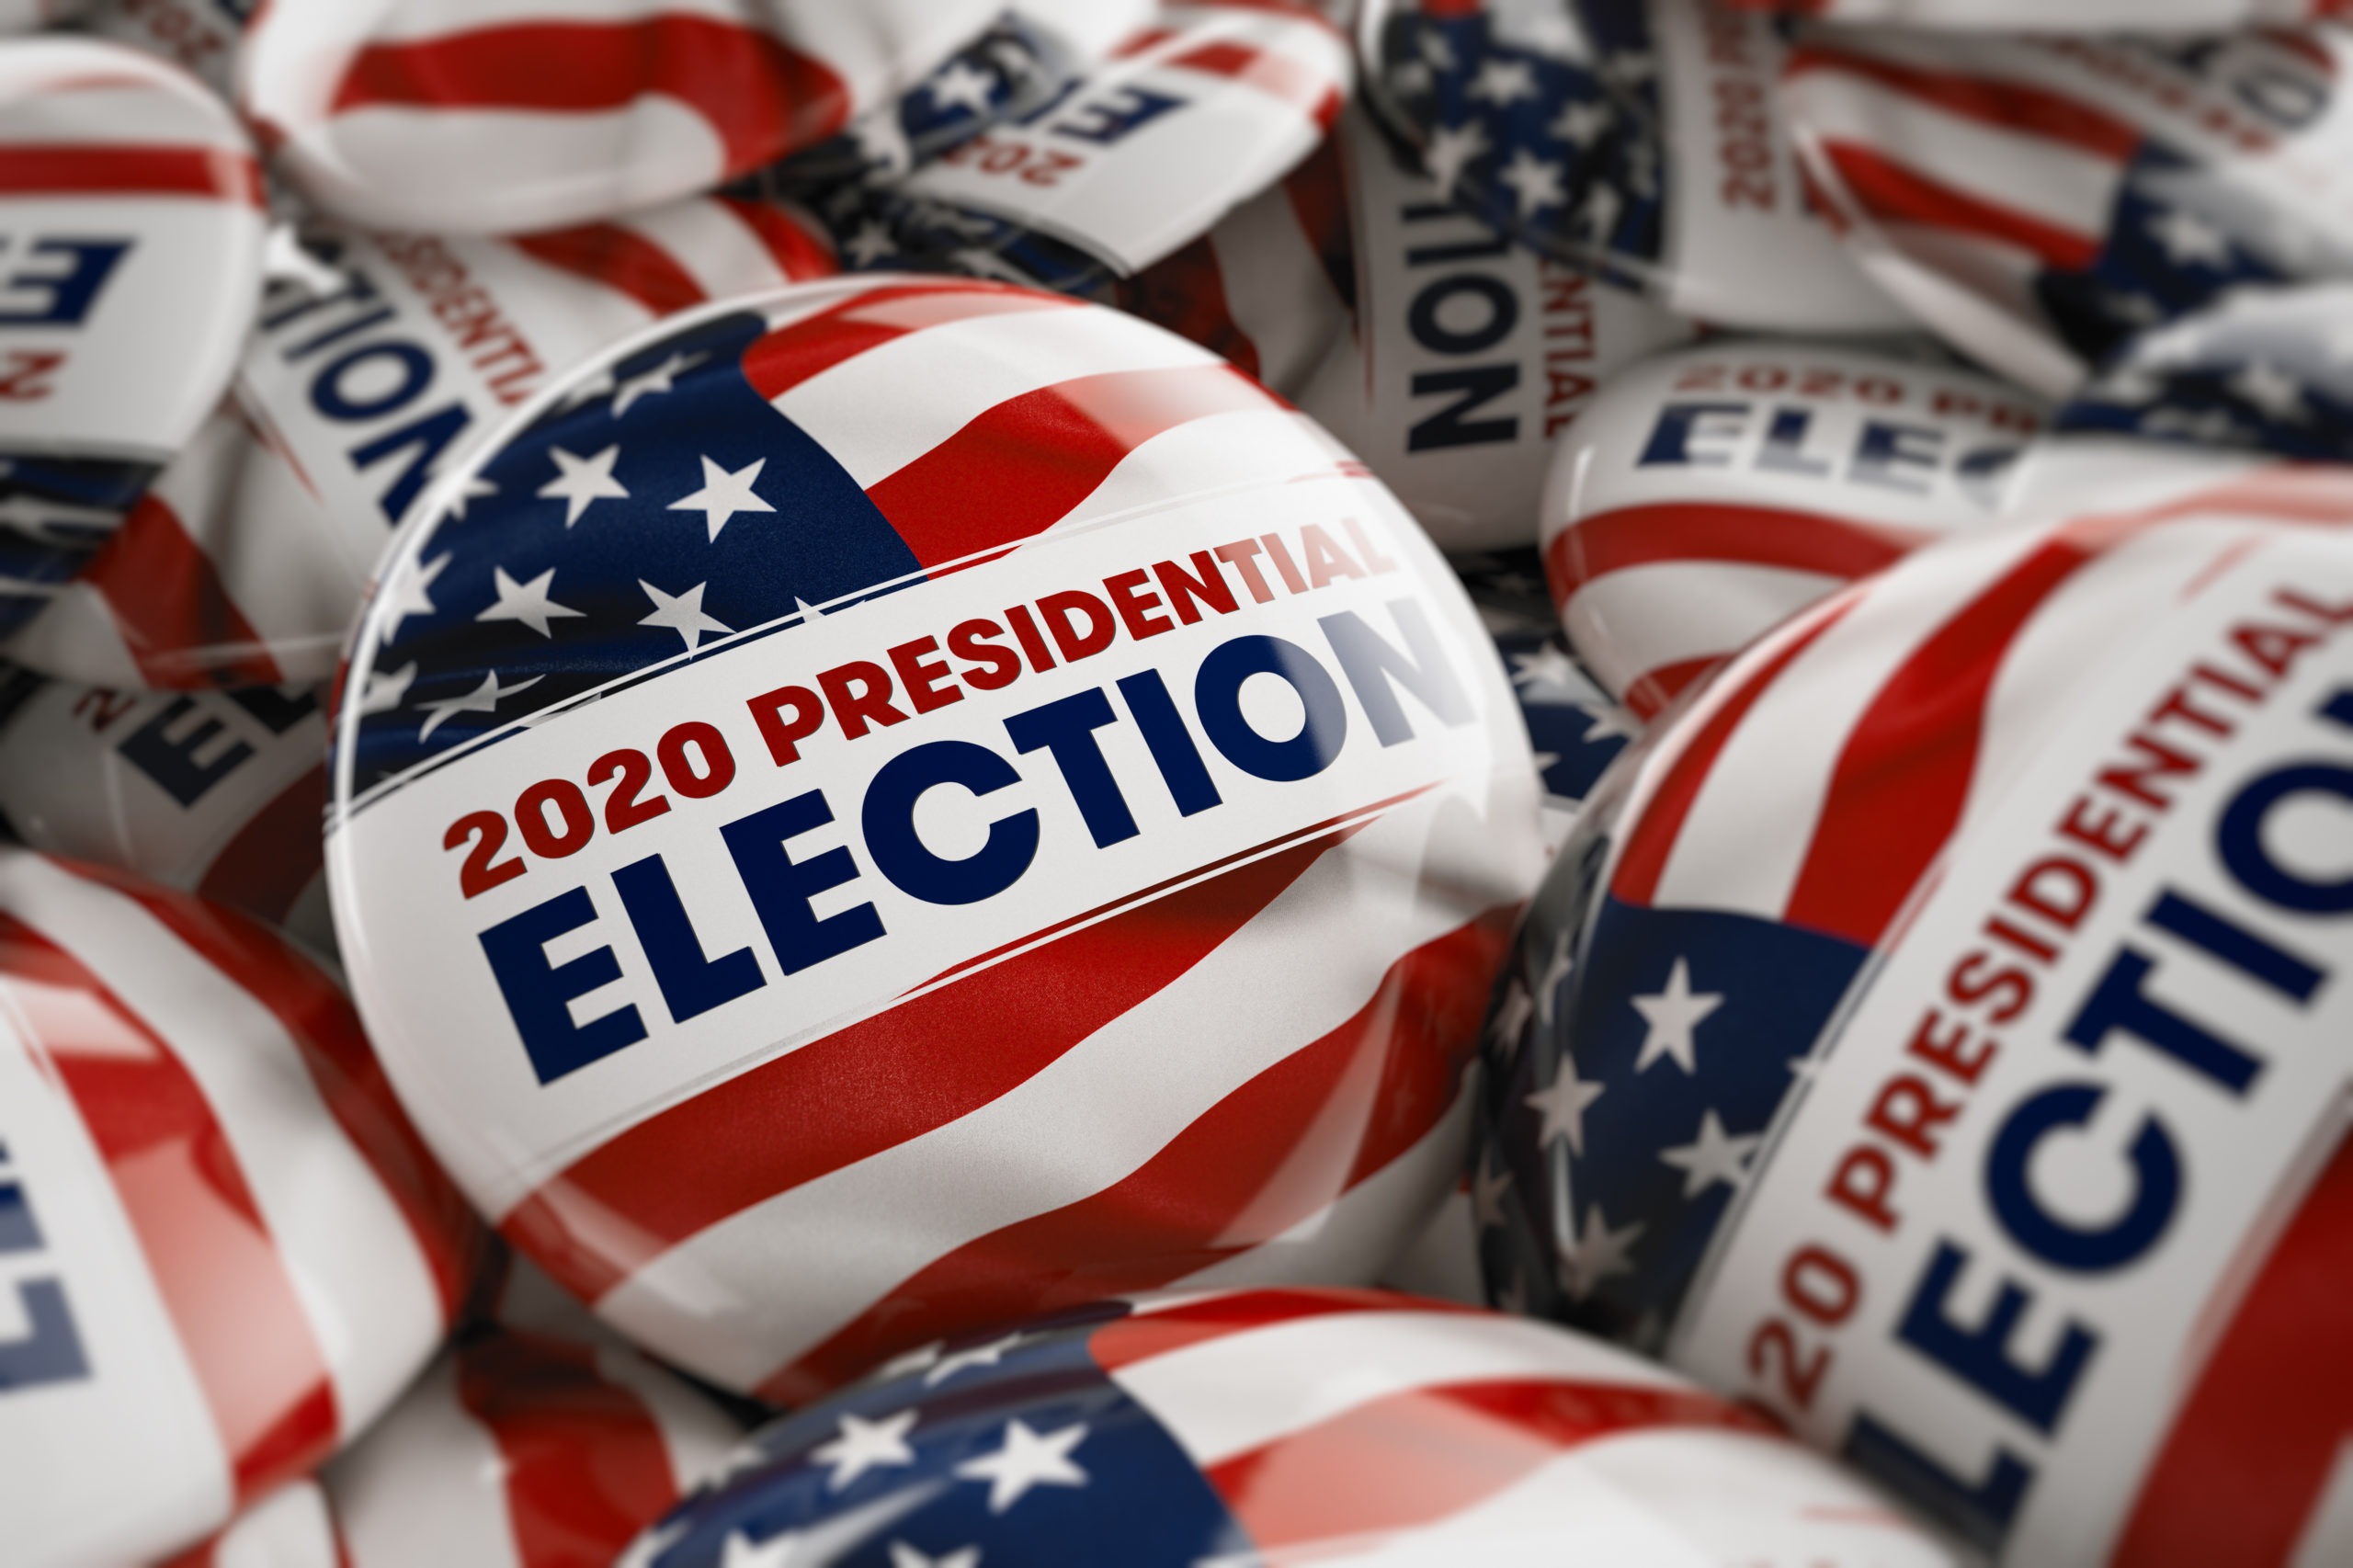 2020 Presidential Election Buttons